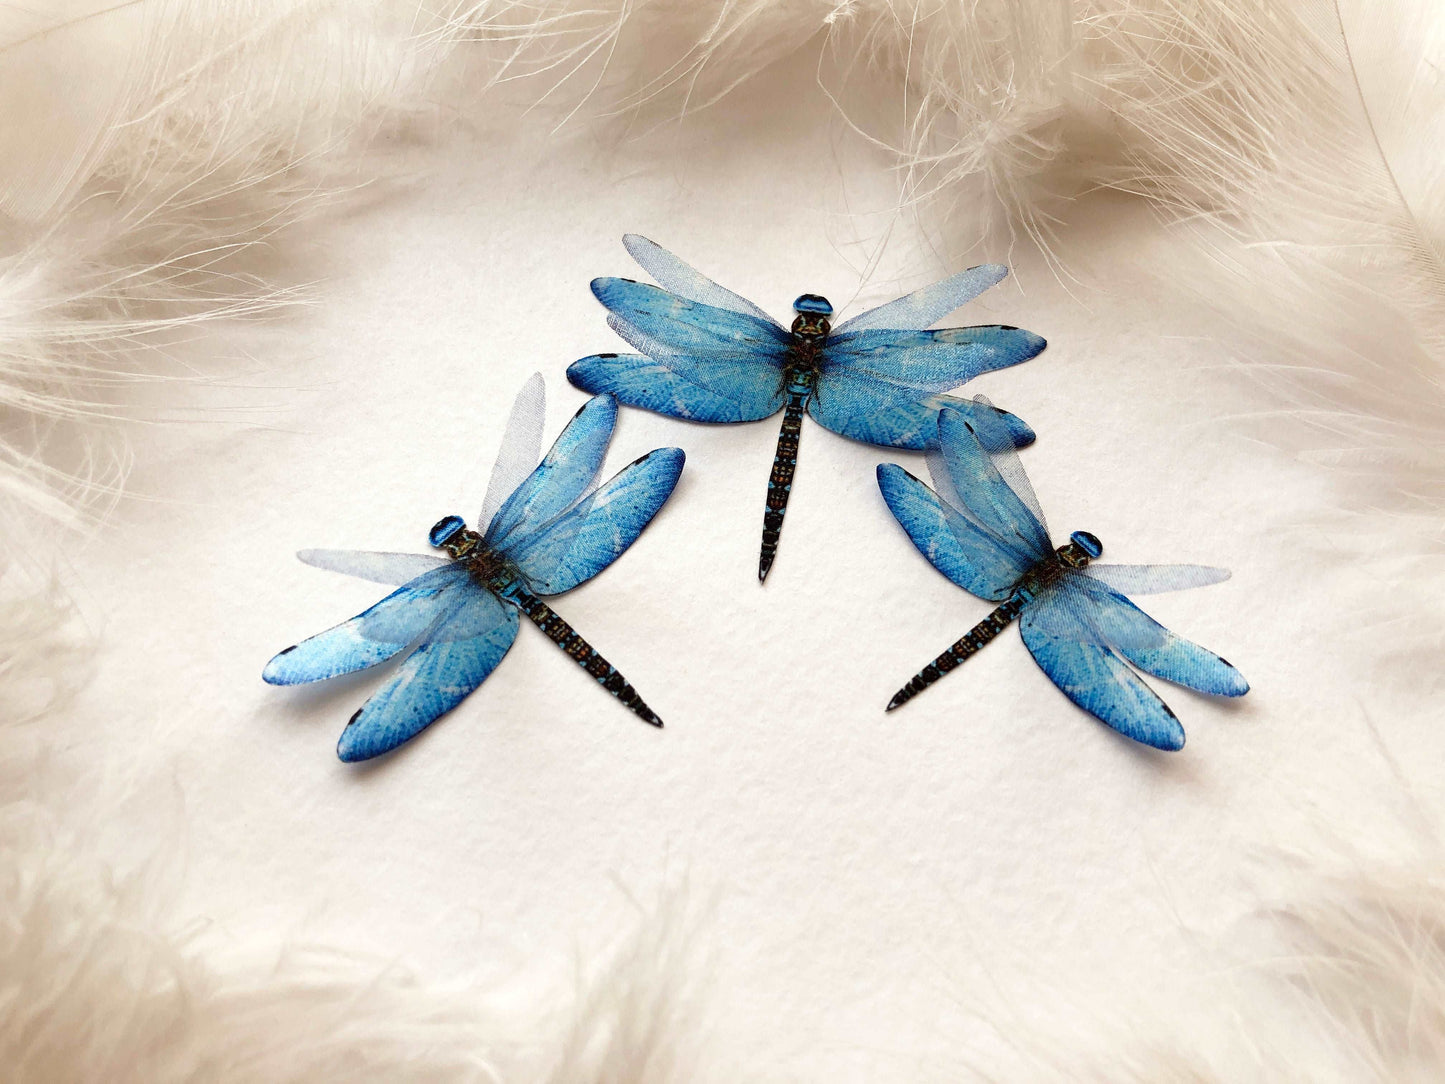 3 Blue Dragonflies Handmade of Silk on White Background with Feathers